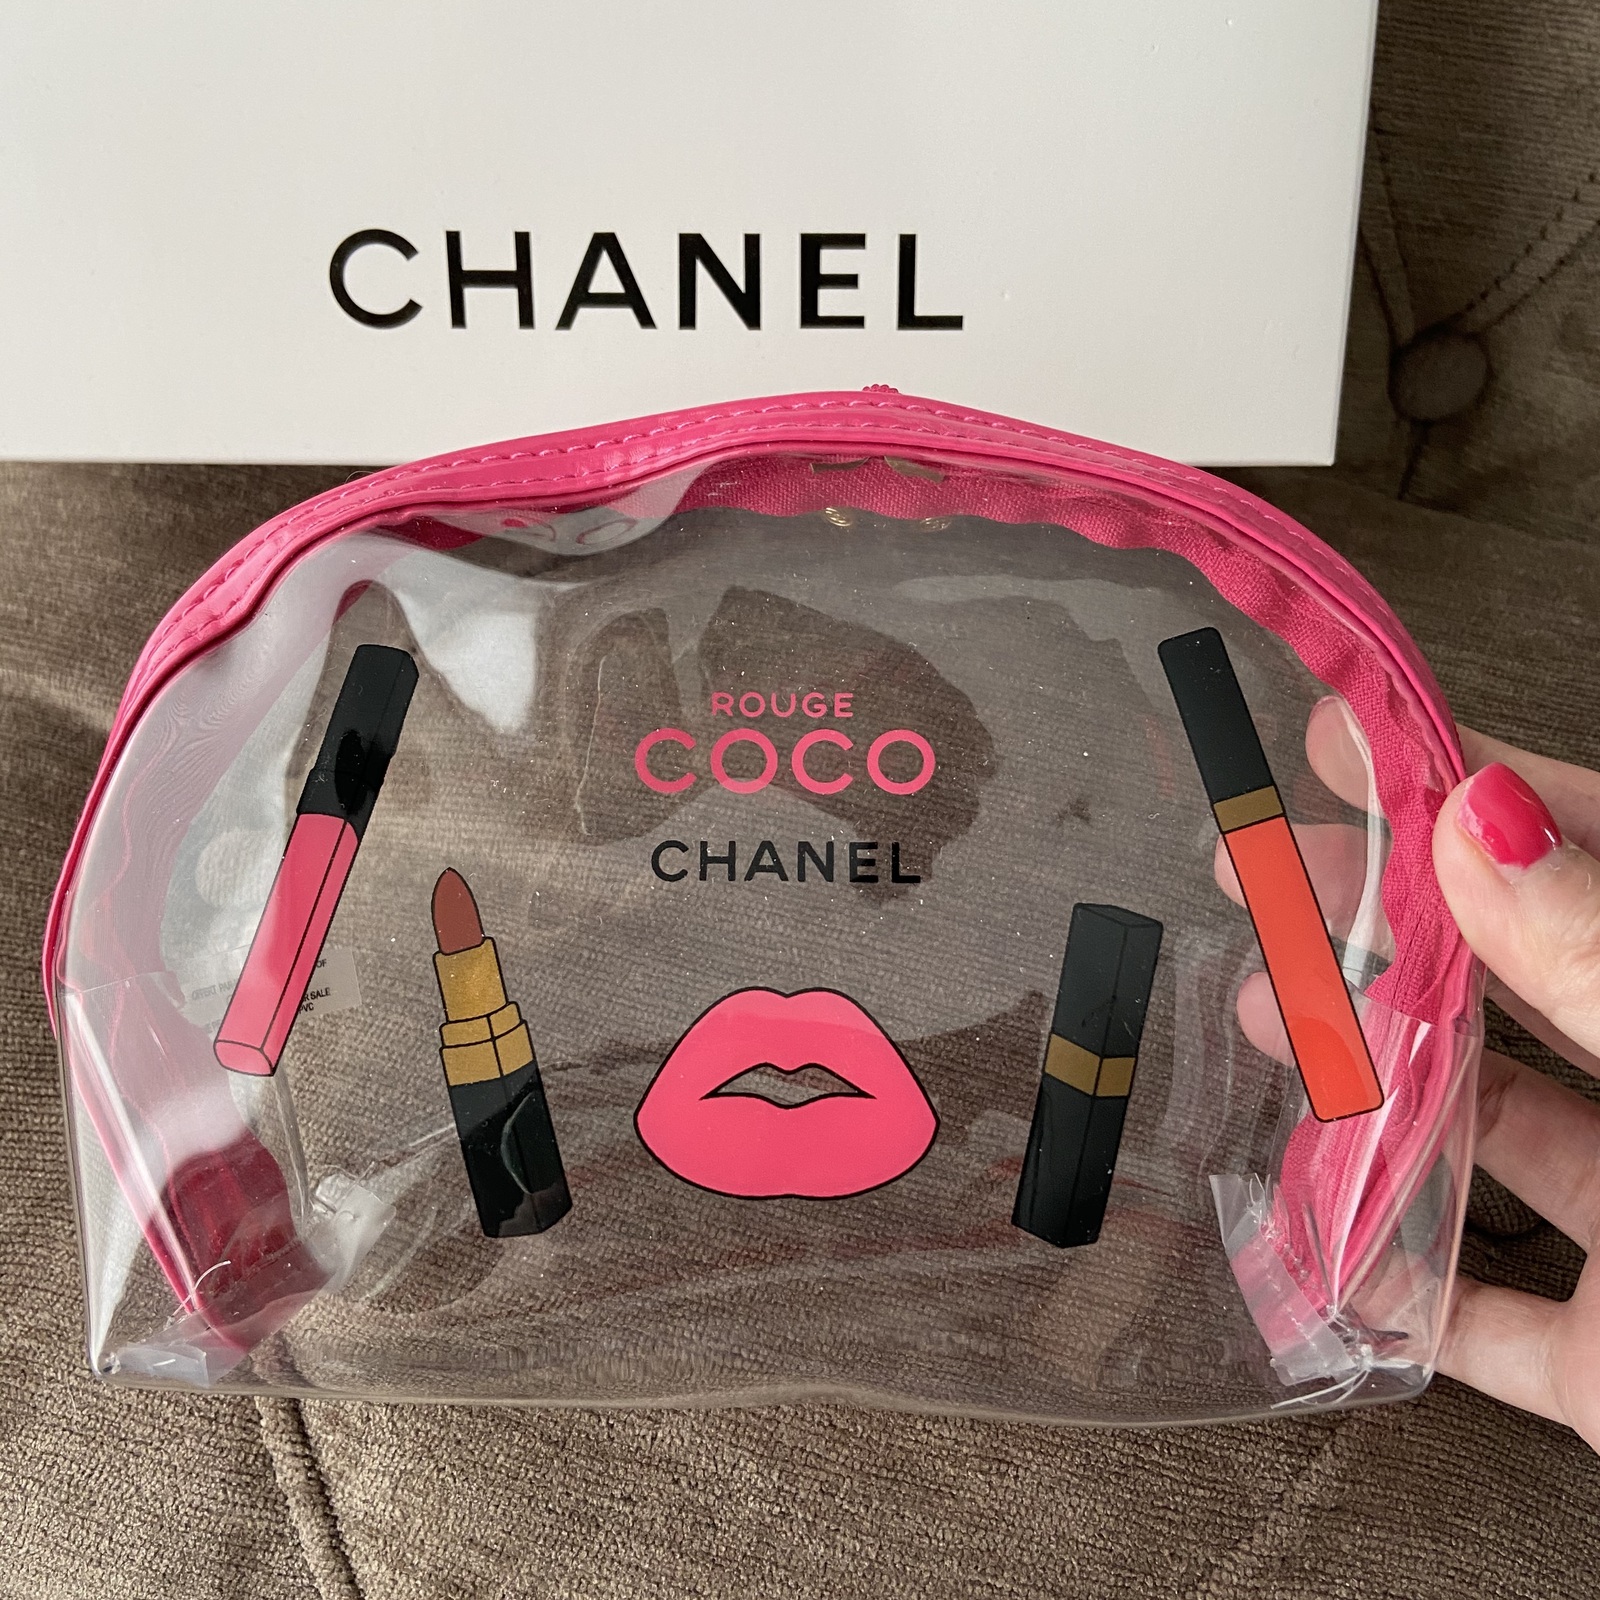 Chanel CoCo Makeup Bag Pouch Case Gift Box and 15 similar items